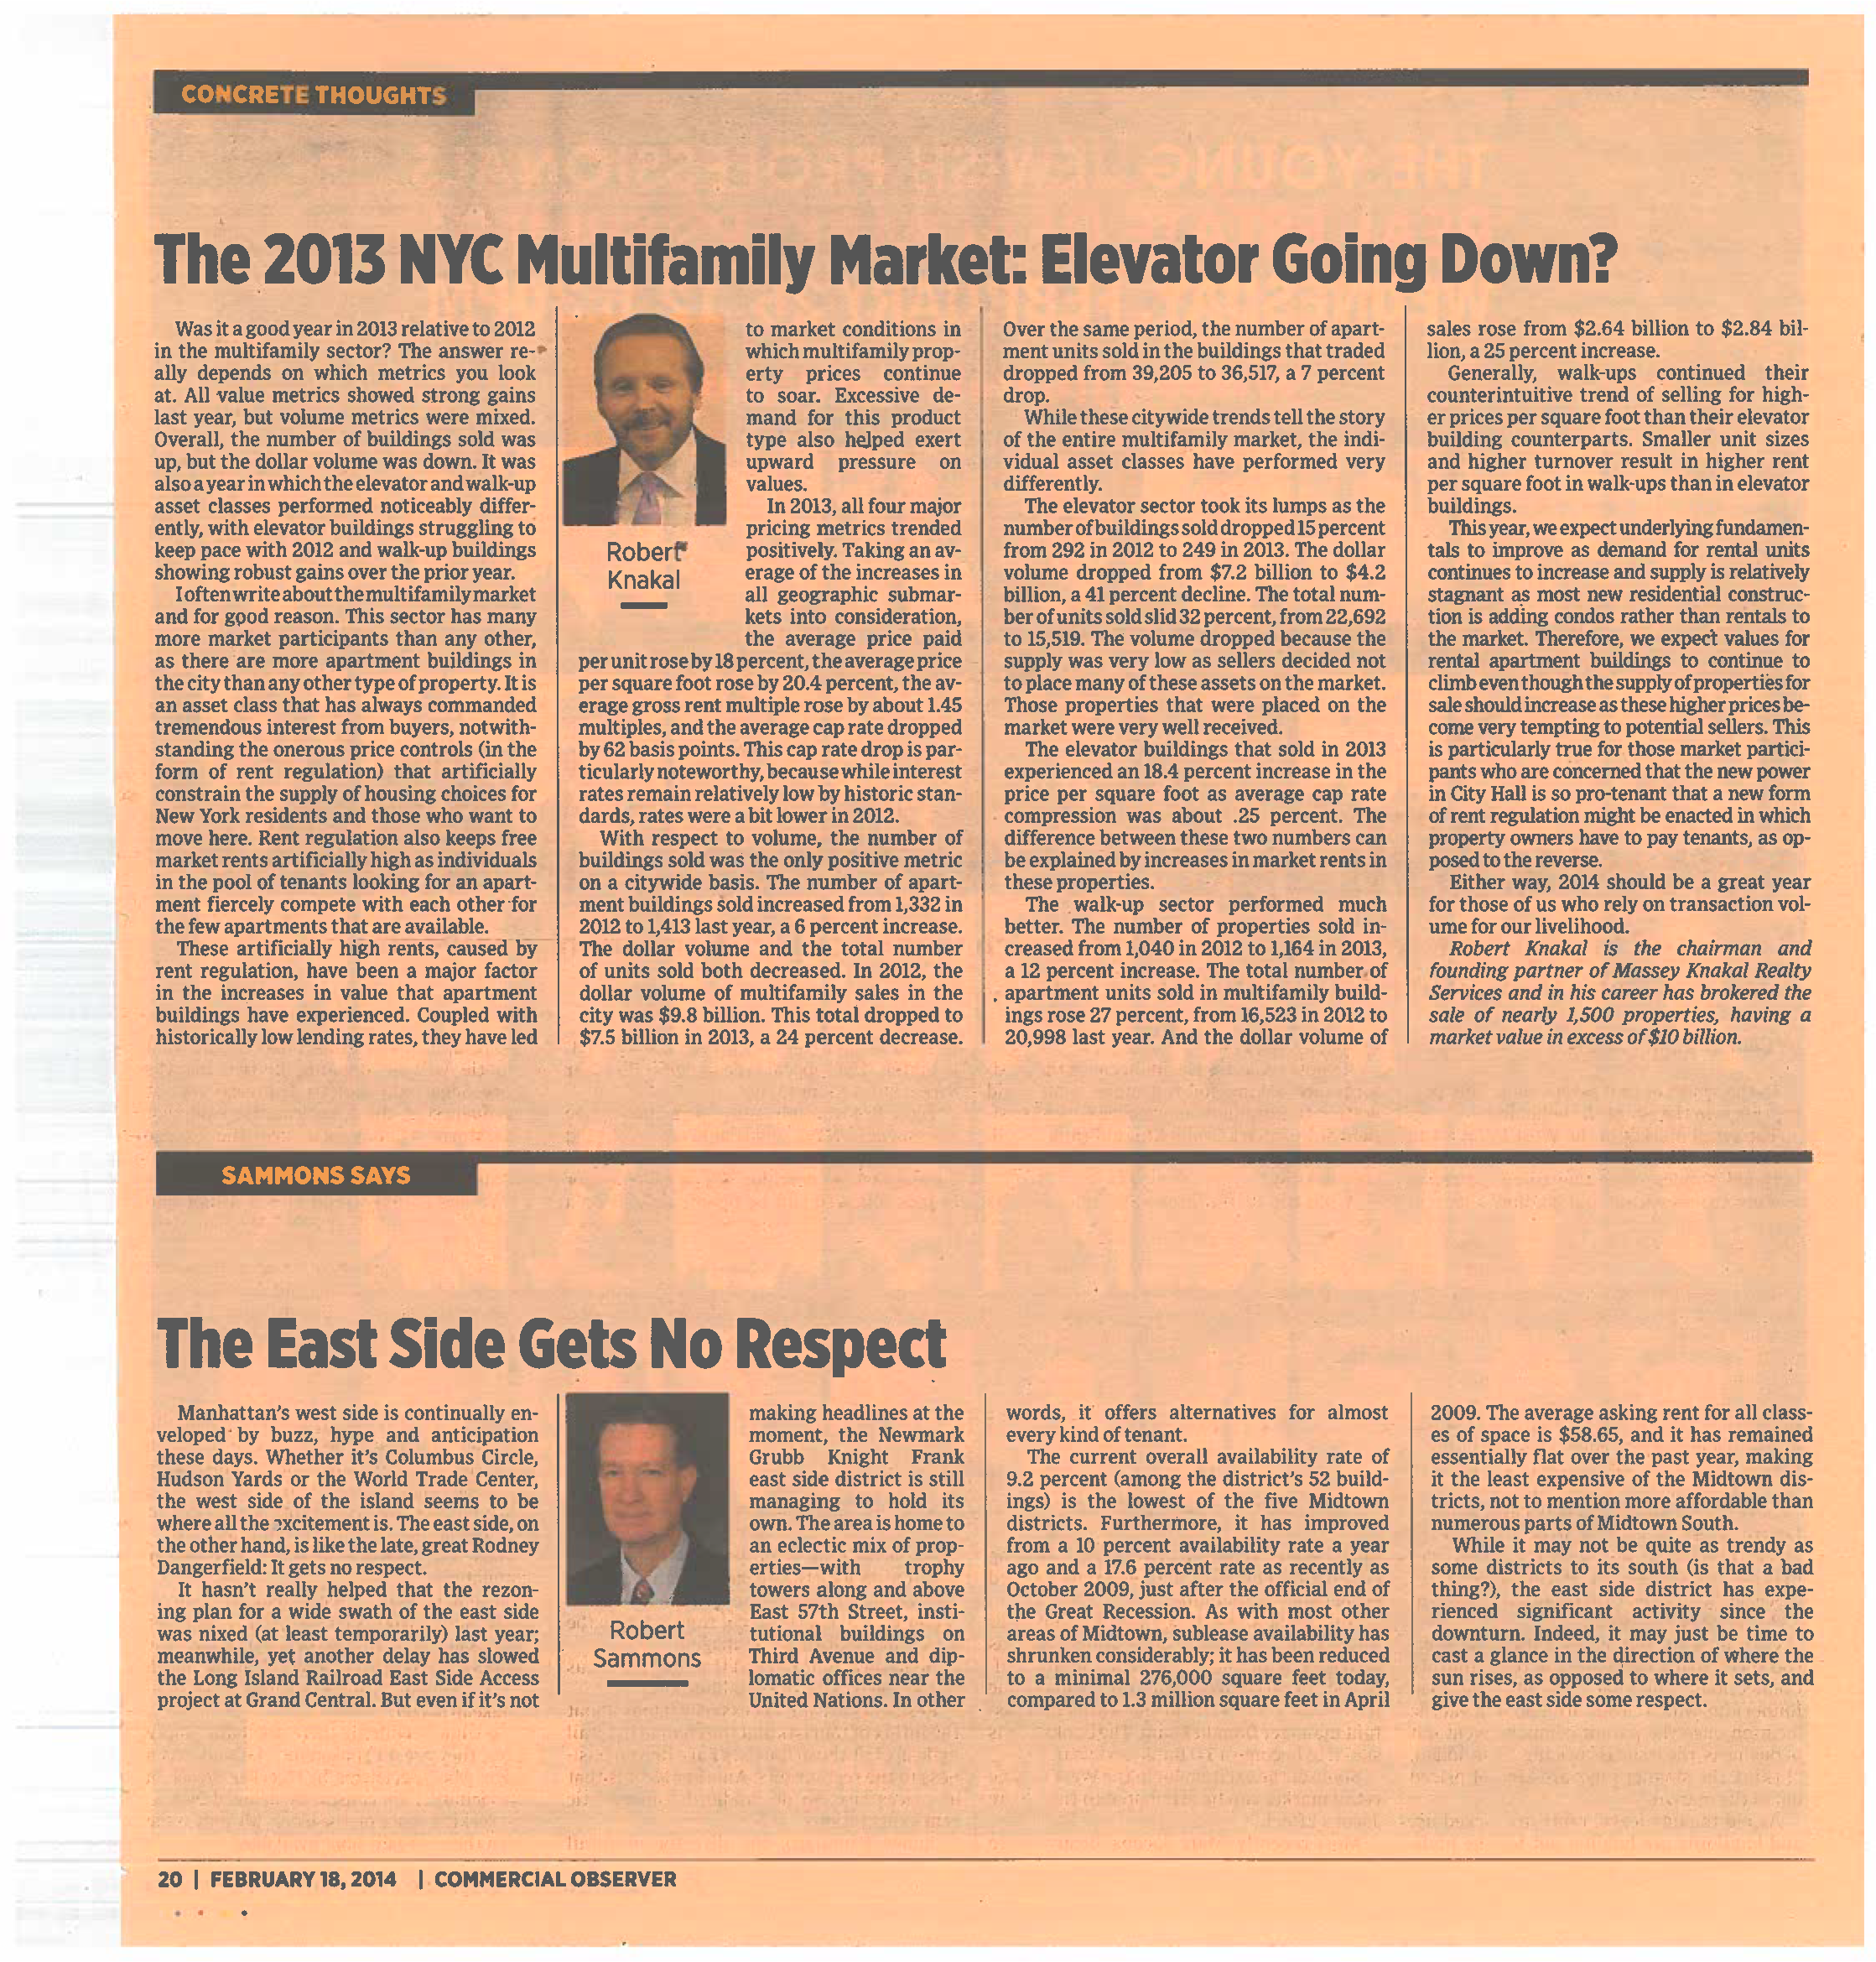 Concrete Thoughts - The 2013 NYC Multifamily Market - Elevator Going Down - Feb 18 2014